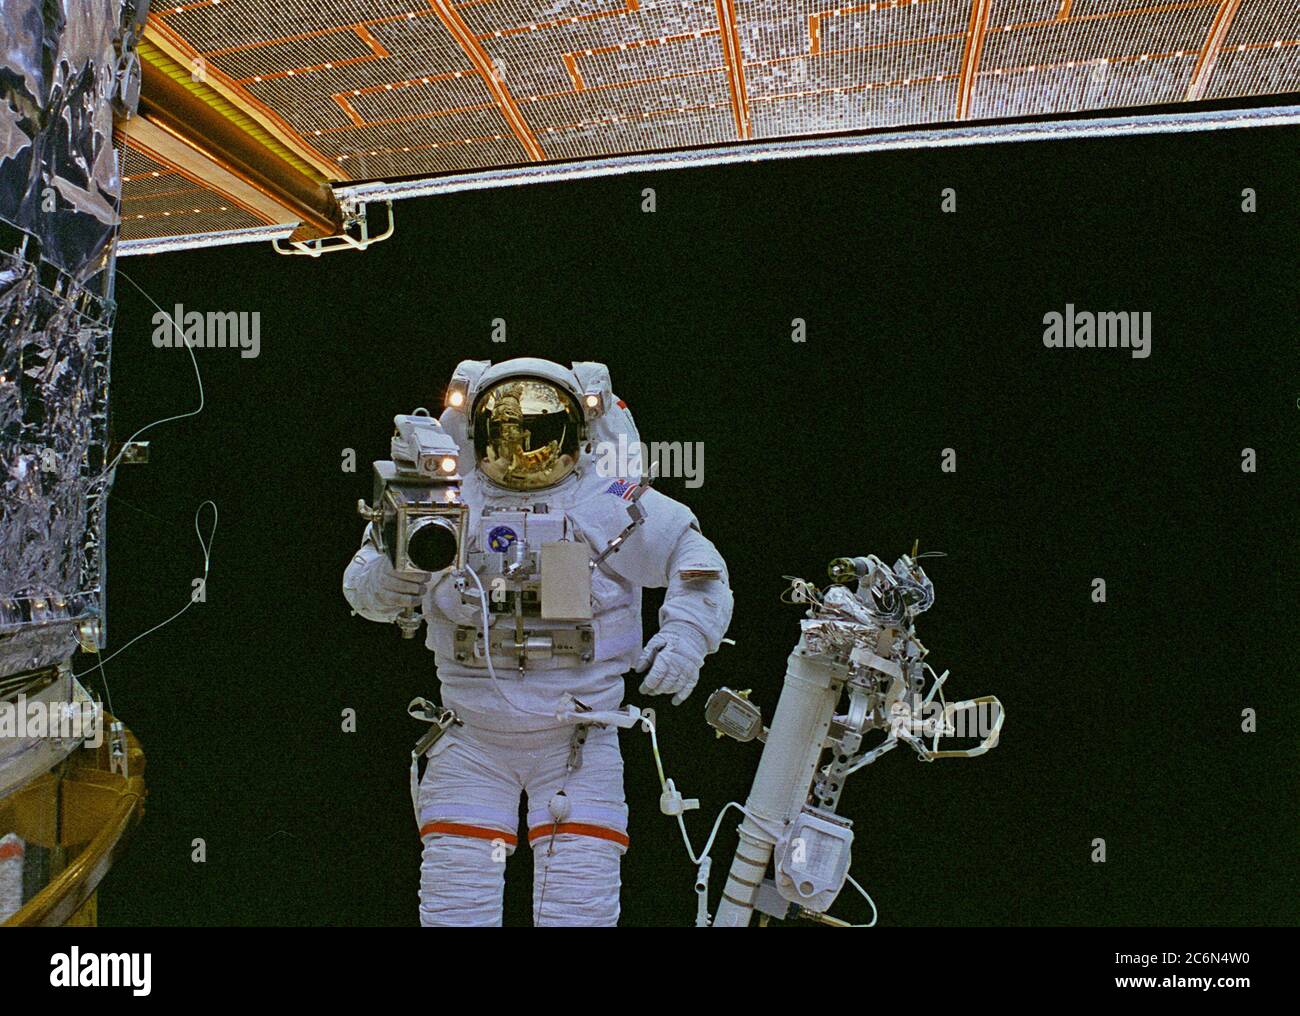 (17 Feb. 1997) --- Astronaut Mark C. Lee, on the end of the Remote Manipulator System (RMS) arm, photographs a bit of patch work on the worn insulation material of the Hubble Space Telescope (HST). The rectangular patch is on HST's Bay 8.  Astronaut Steven L. Smith (out of frame) assisted with the patch work.  This was the final Extravehicular Activity (EVA) of five performed by two teams of space walkers on the STS-82 crew. Stock Photo